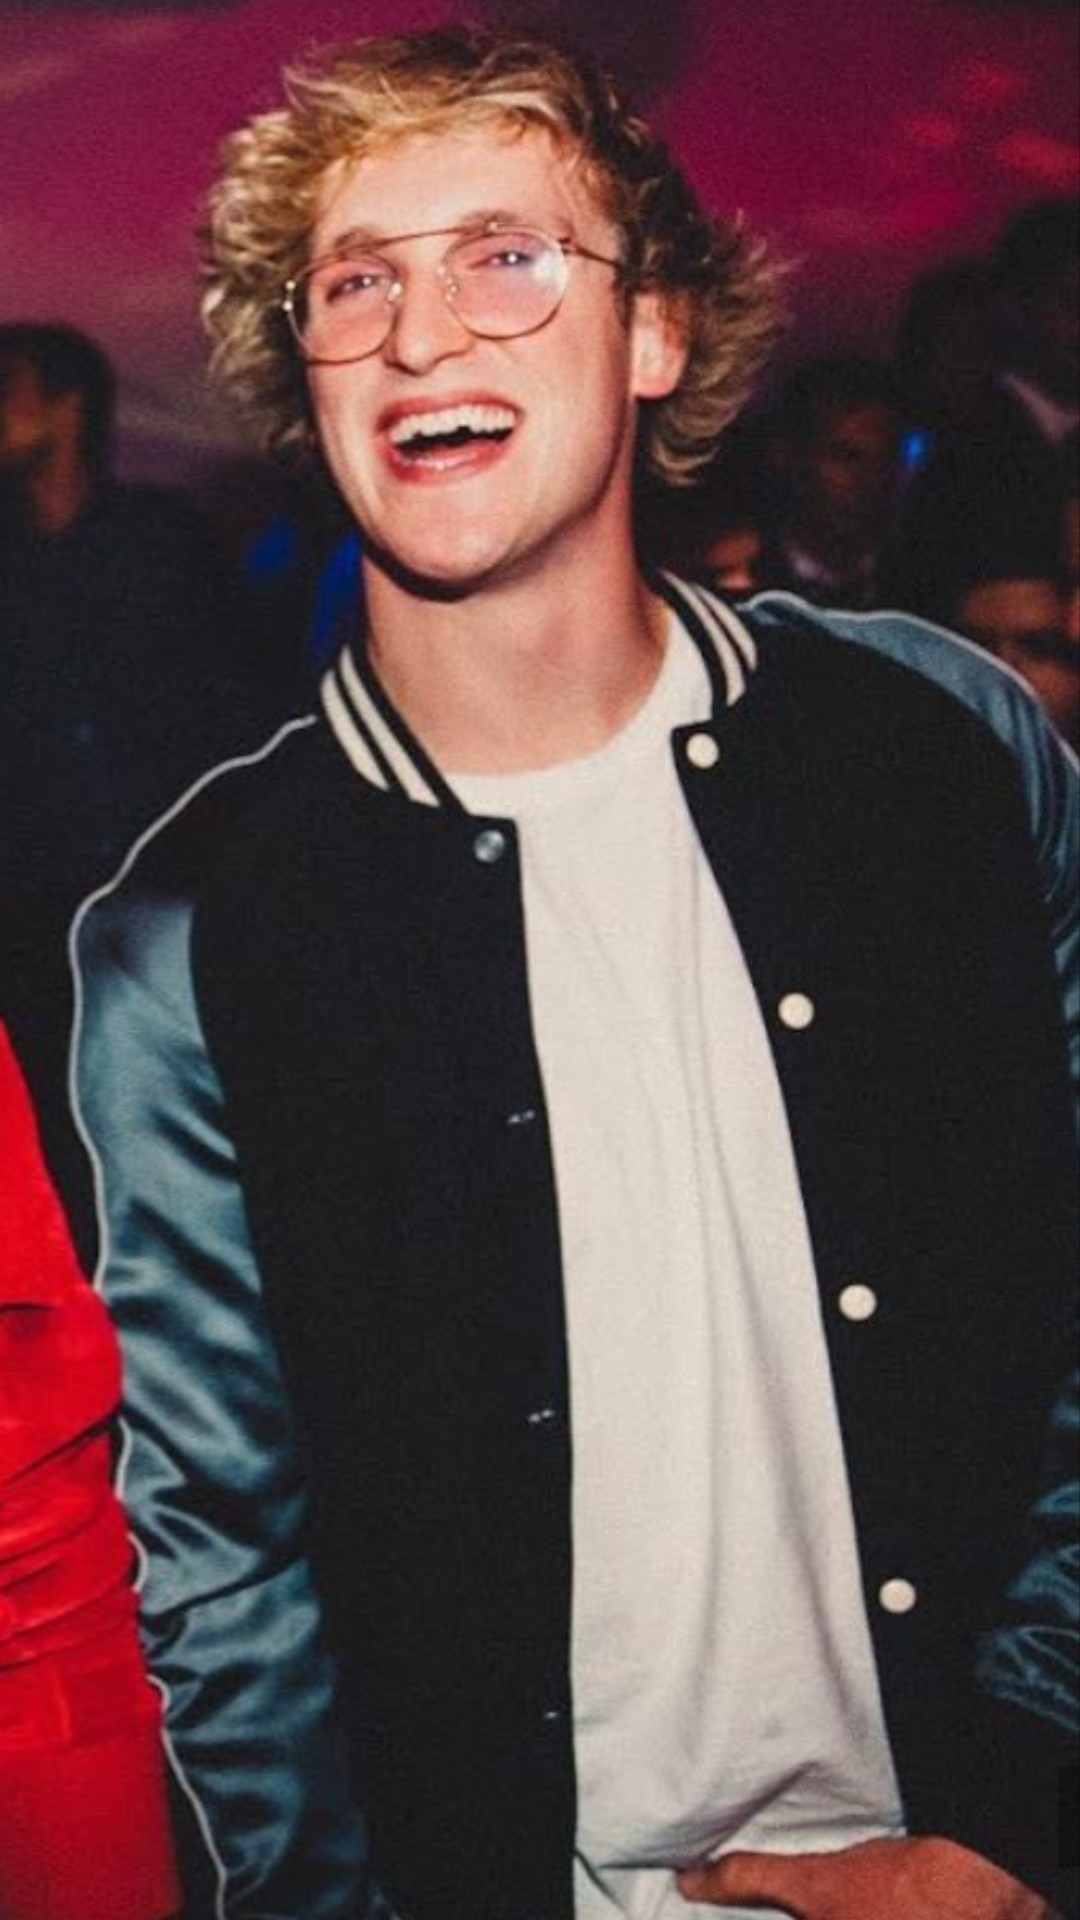 jake paul wallpaper,hairstyle,forehead,cool,outerwear,smile